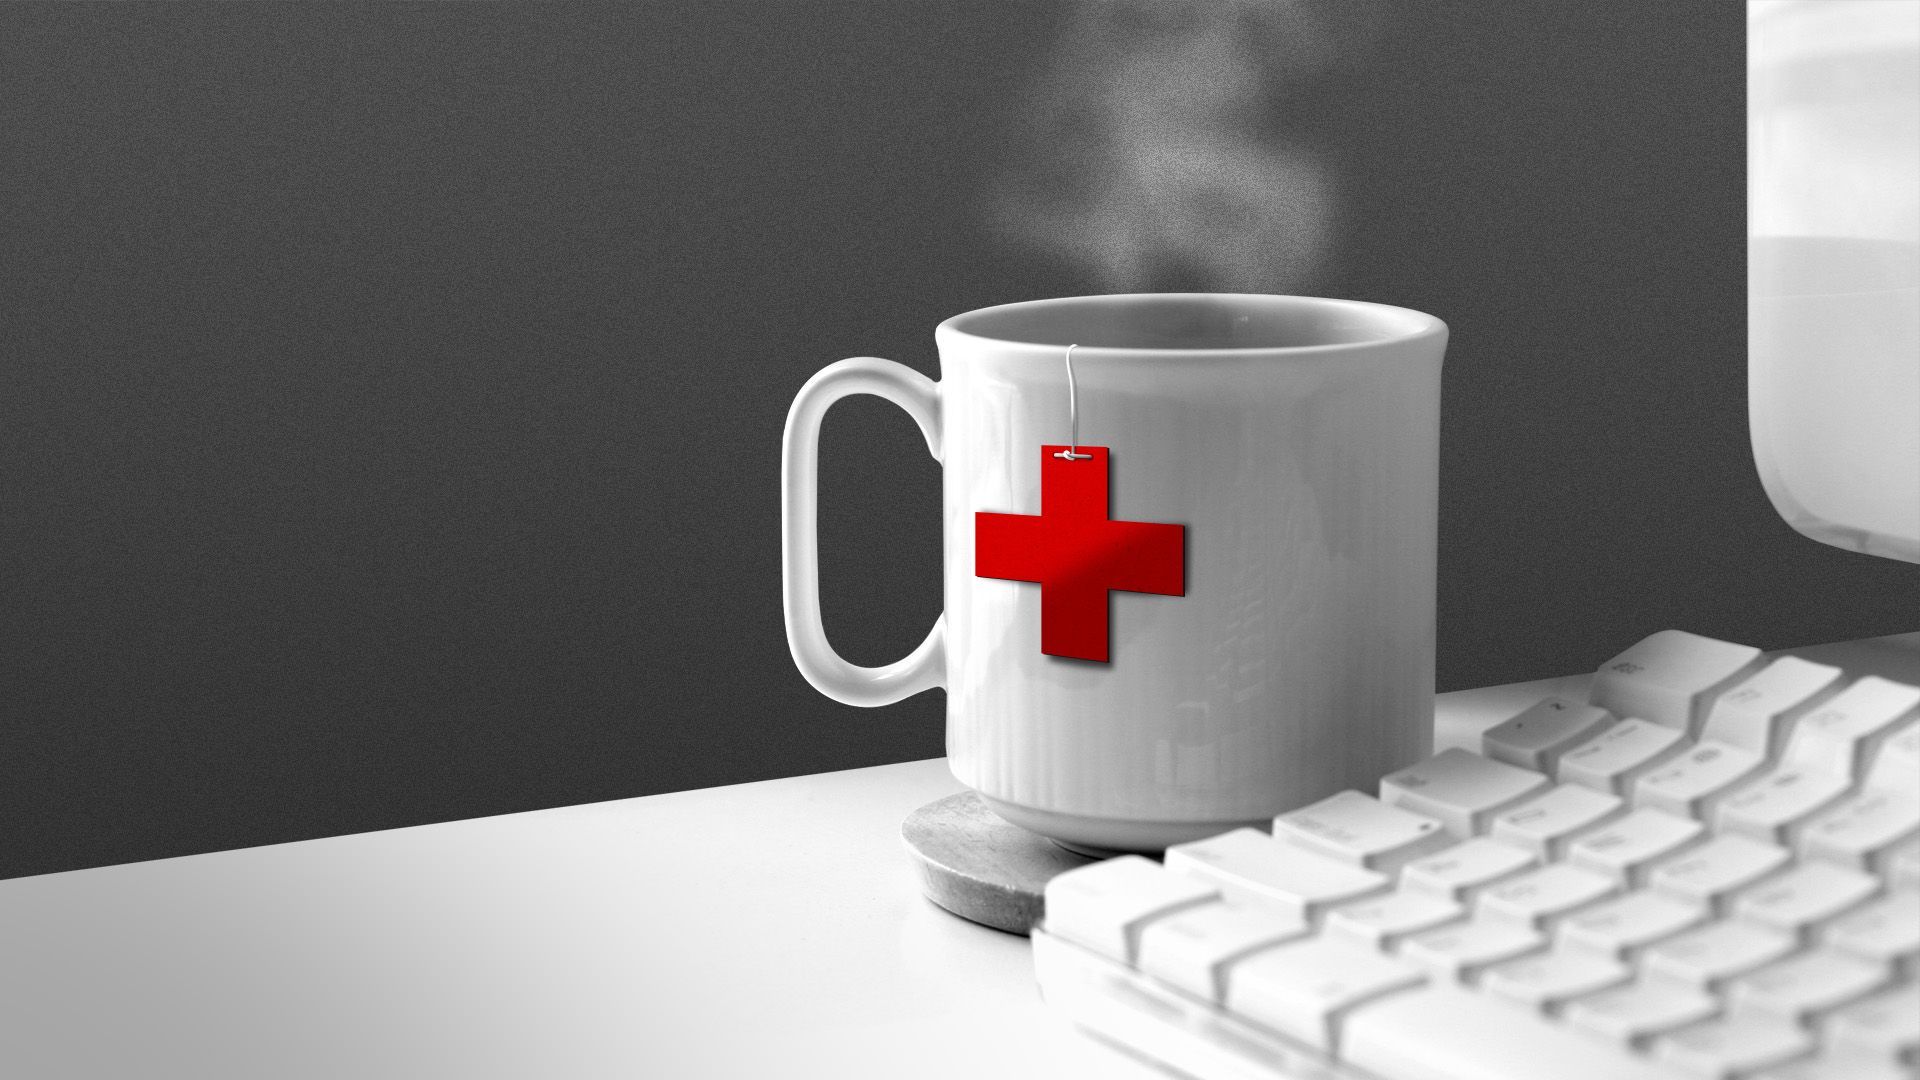 Illustration of a cup of tea at a computer desk with a red cross for the teabag